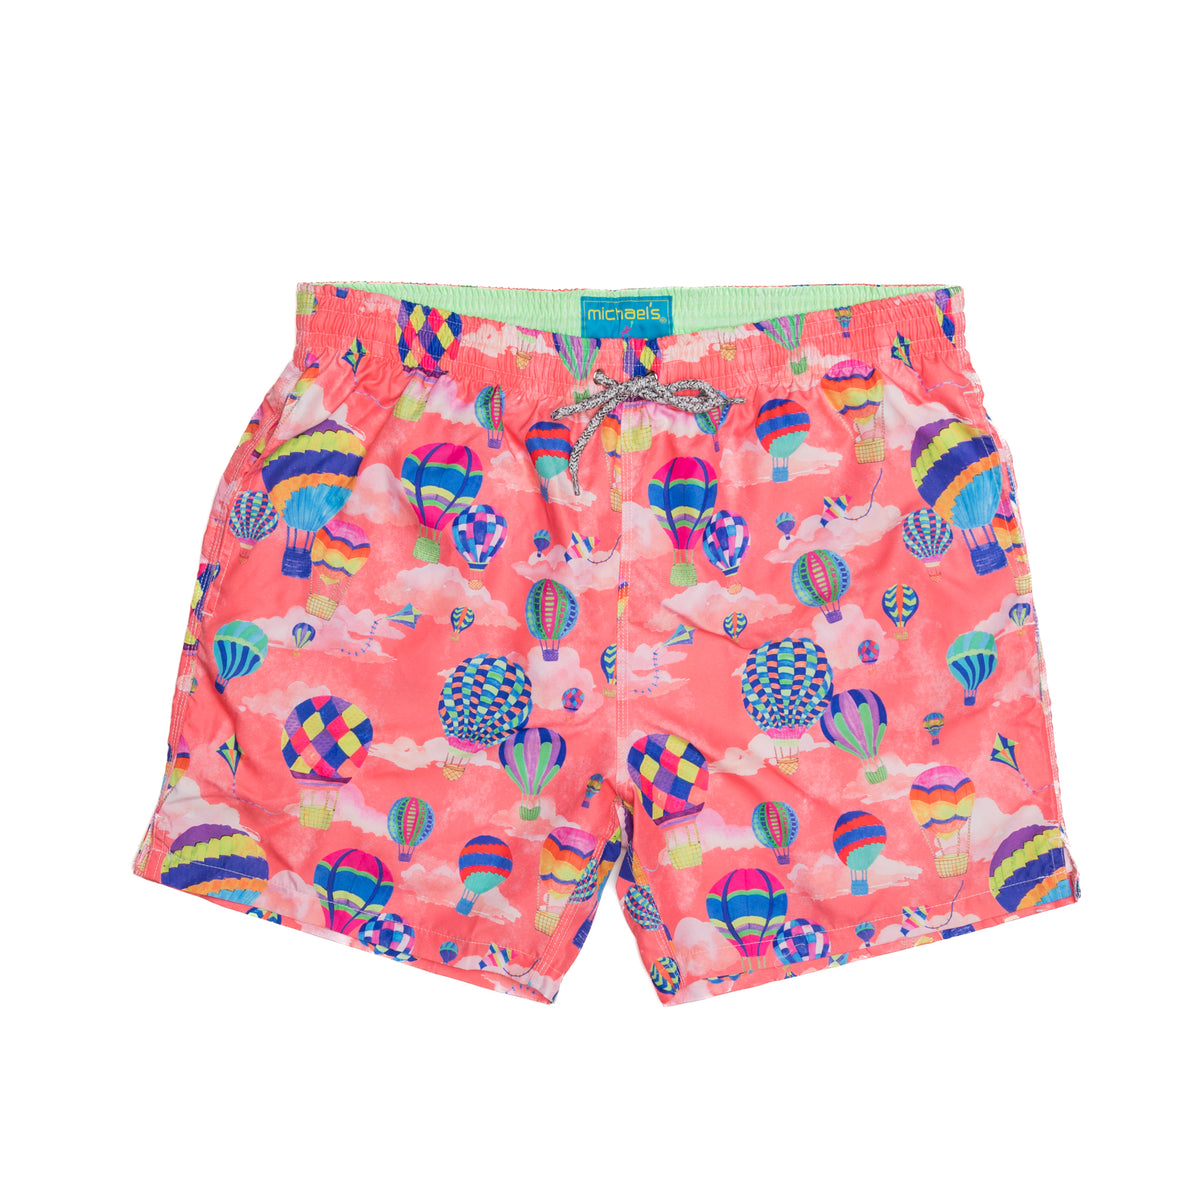 Coral swim trunks with hot air balloons pattern for boys